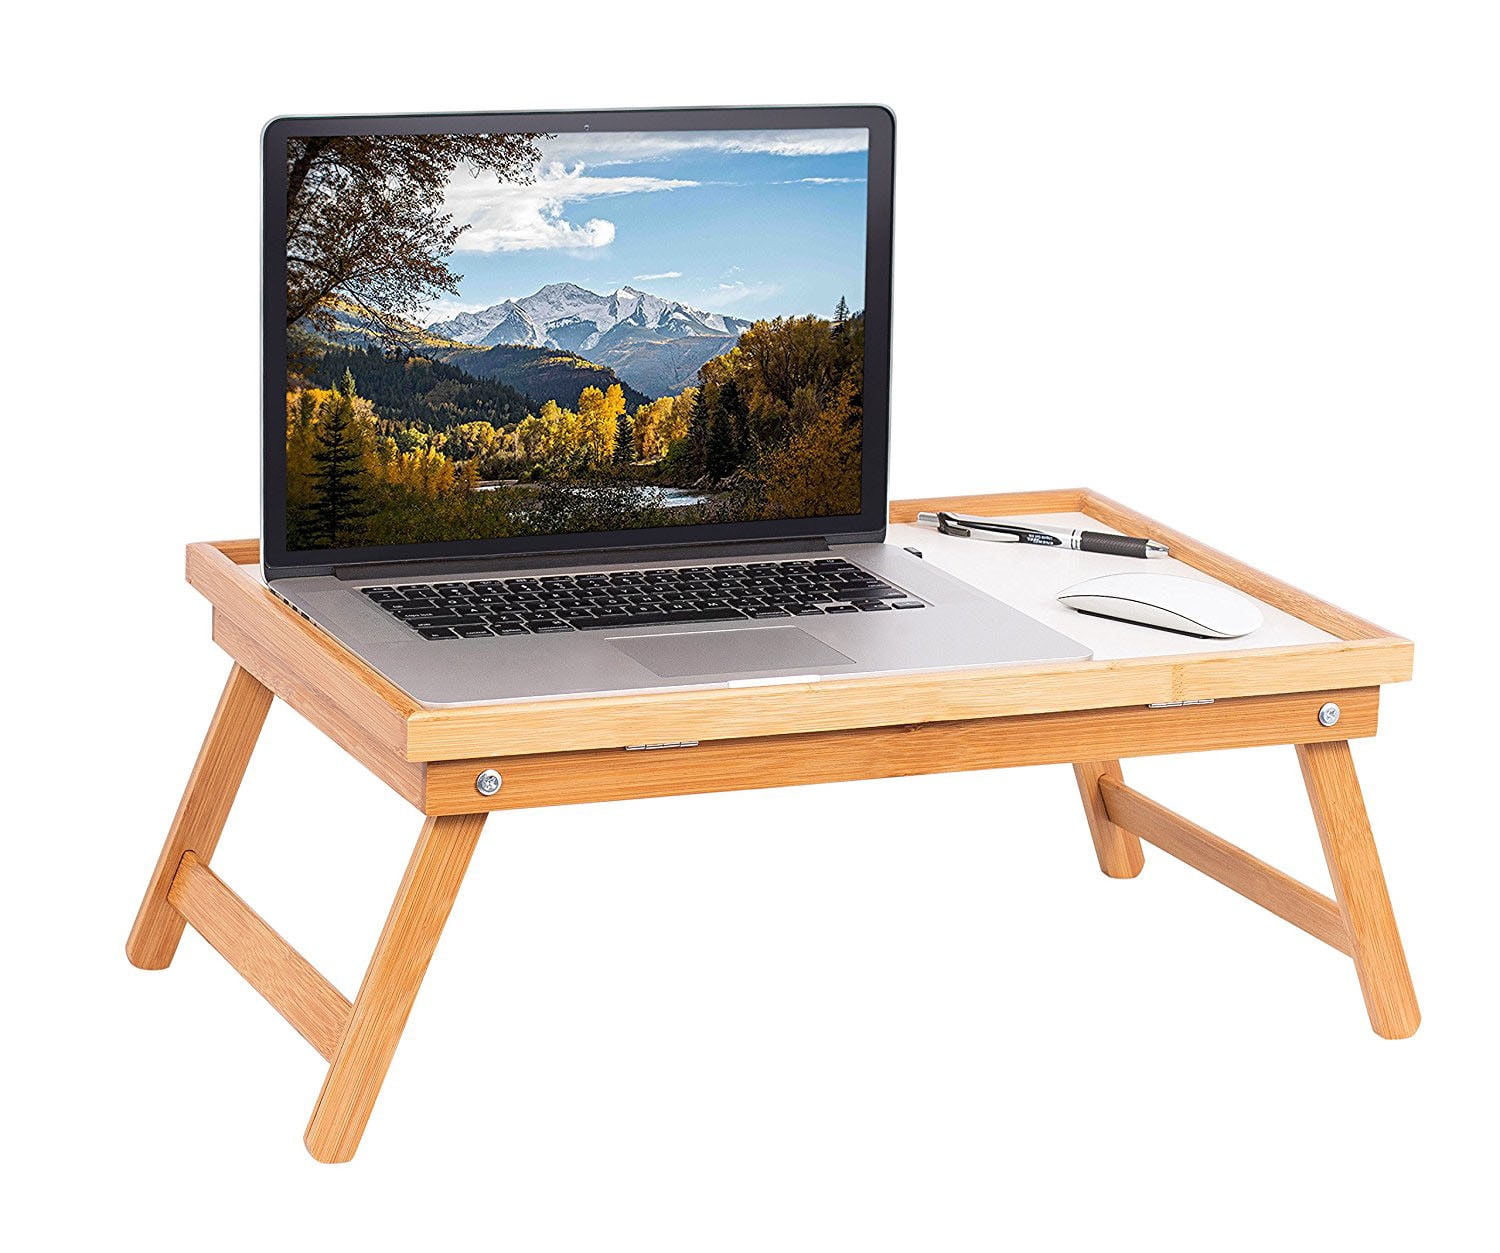 Adjustable Dining-table Wood Bed Tray Lap Desk Serving Table Folding Legs Bamboo 